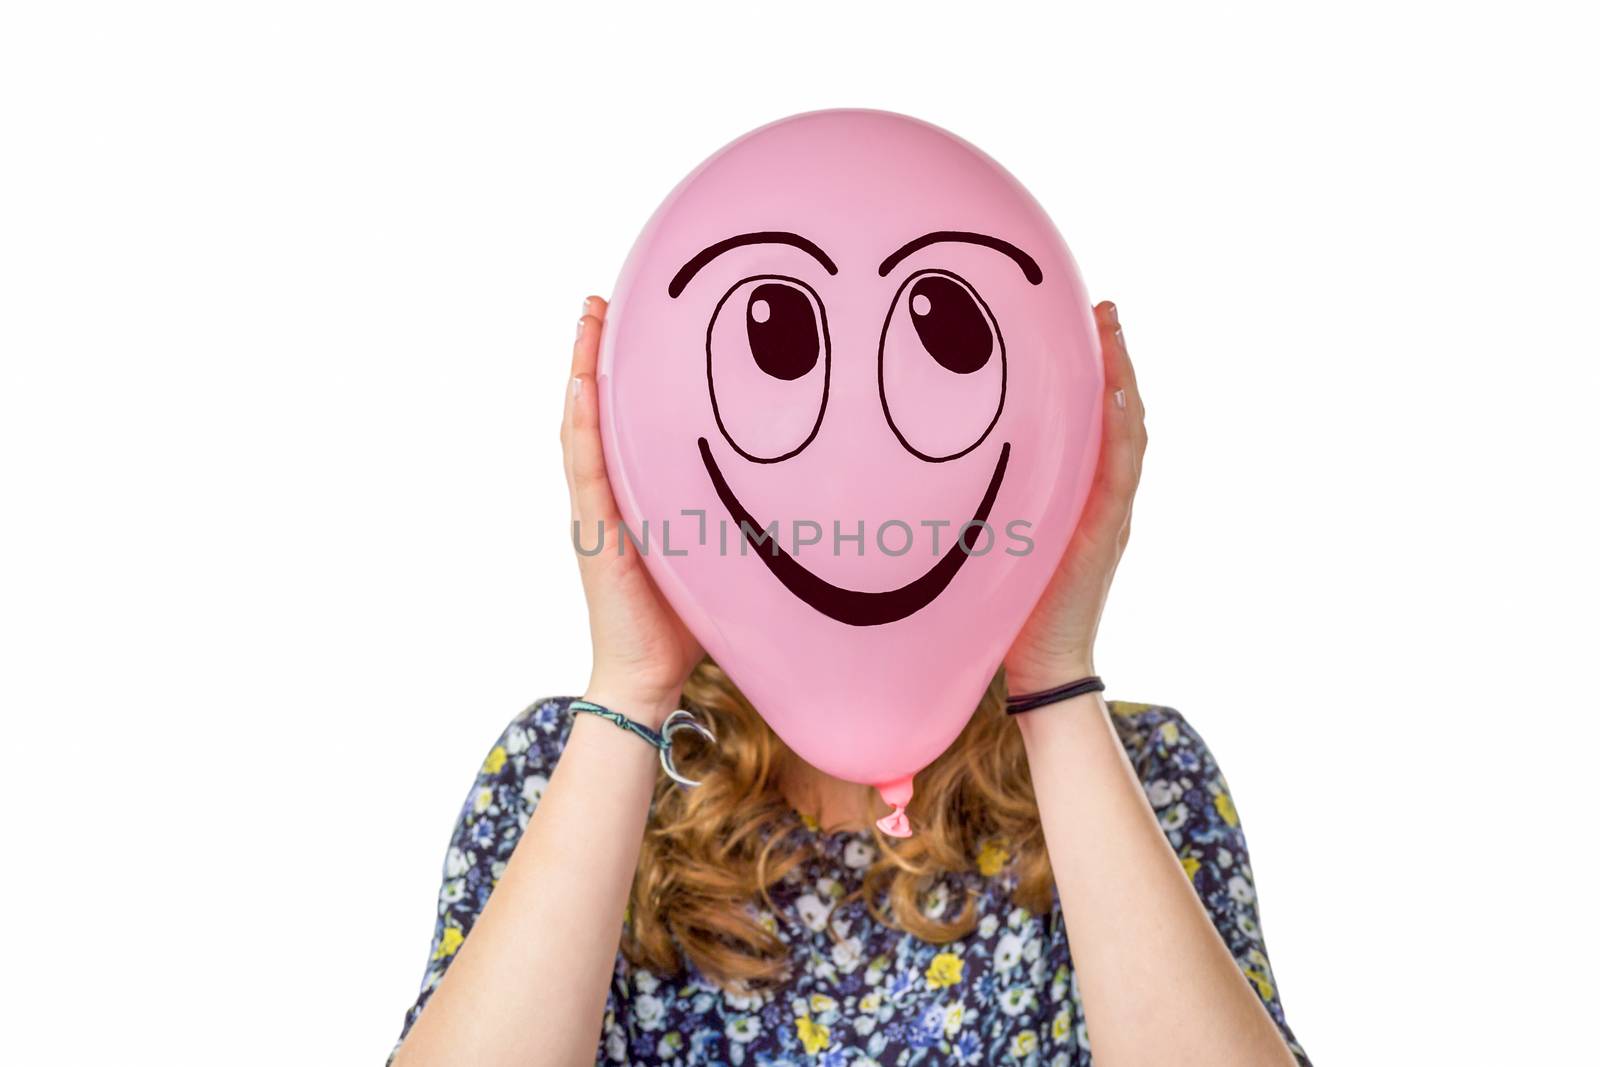 Girl holding pink balloon with smiling face by BenSchonewille